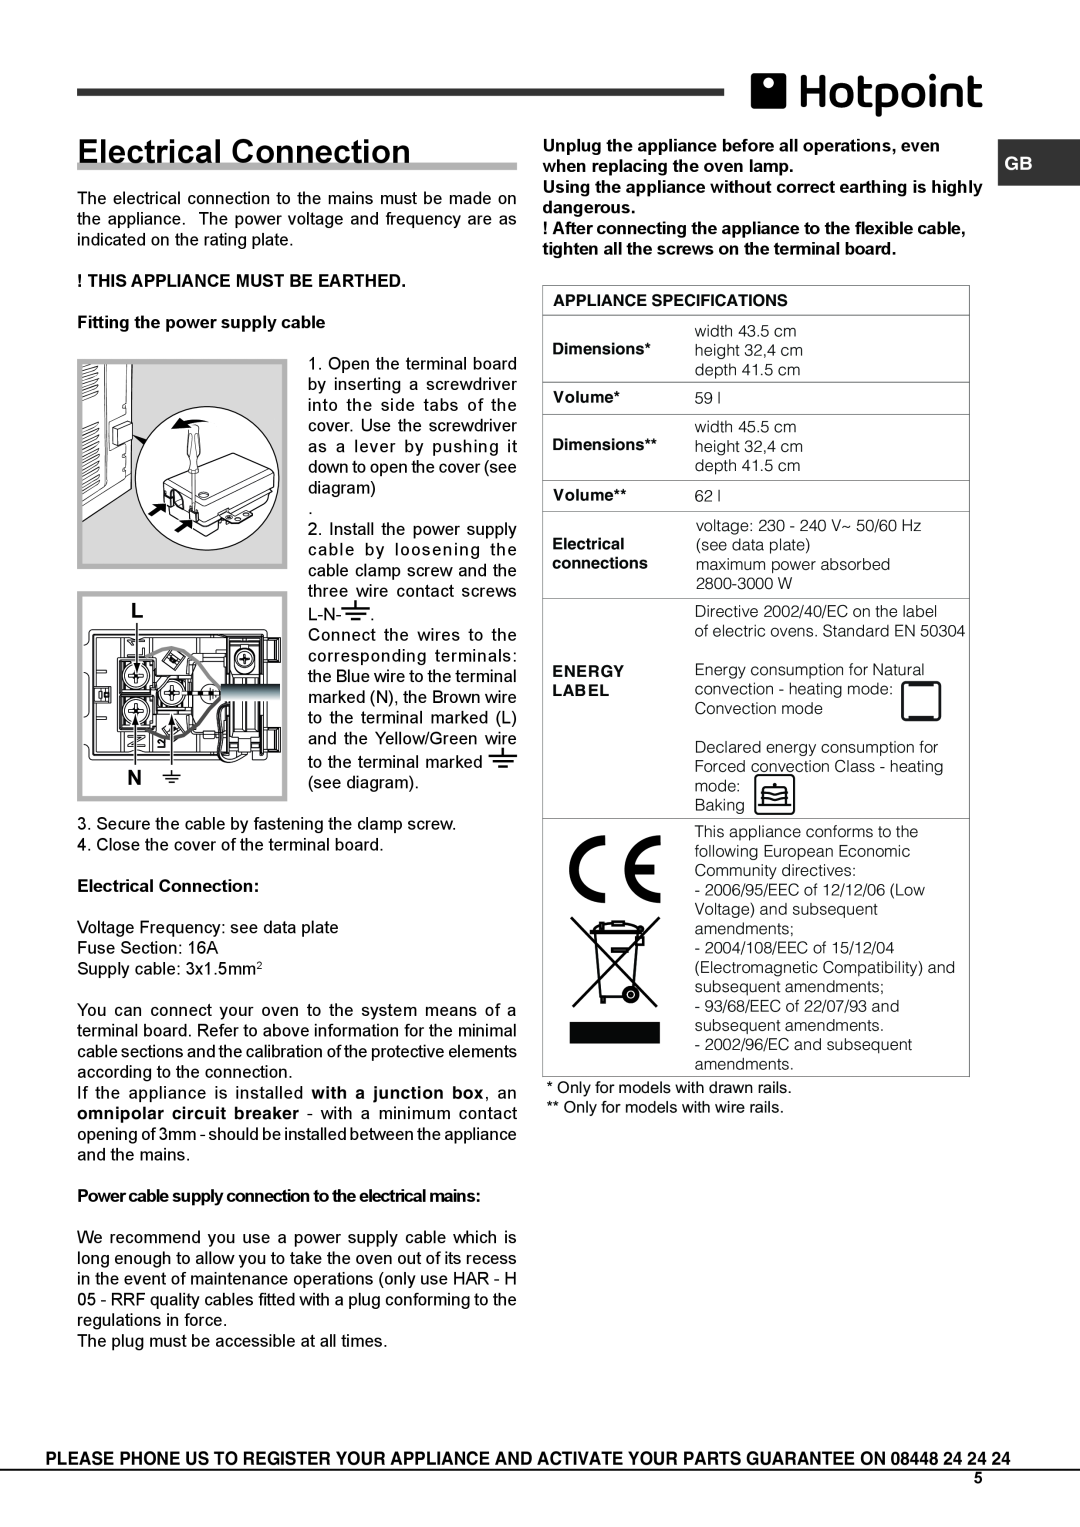 Hotpoint SH83K S, SH83CX S manual Electrical Connection 